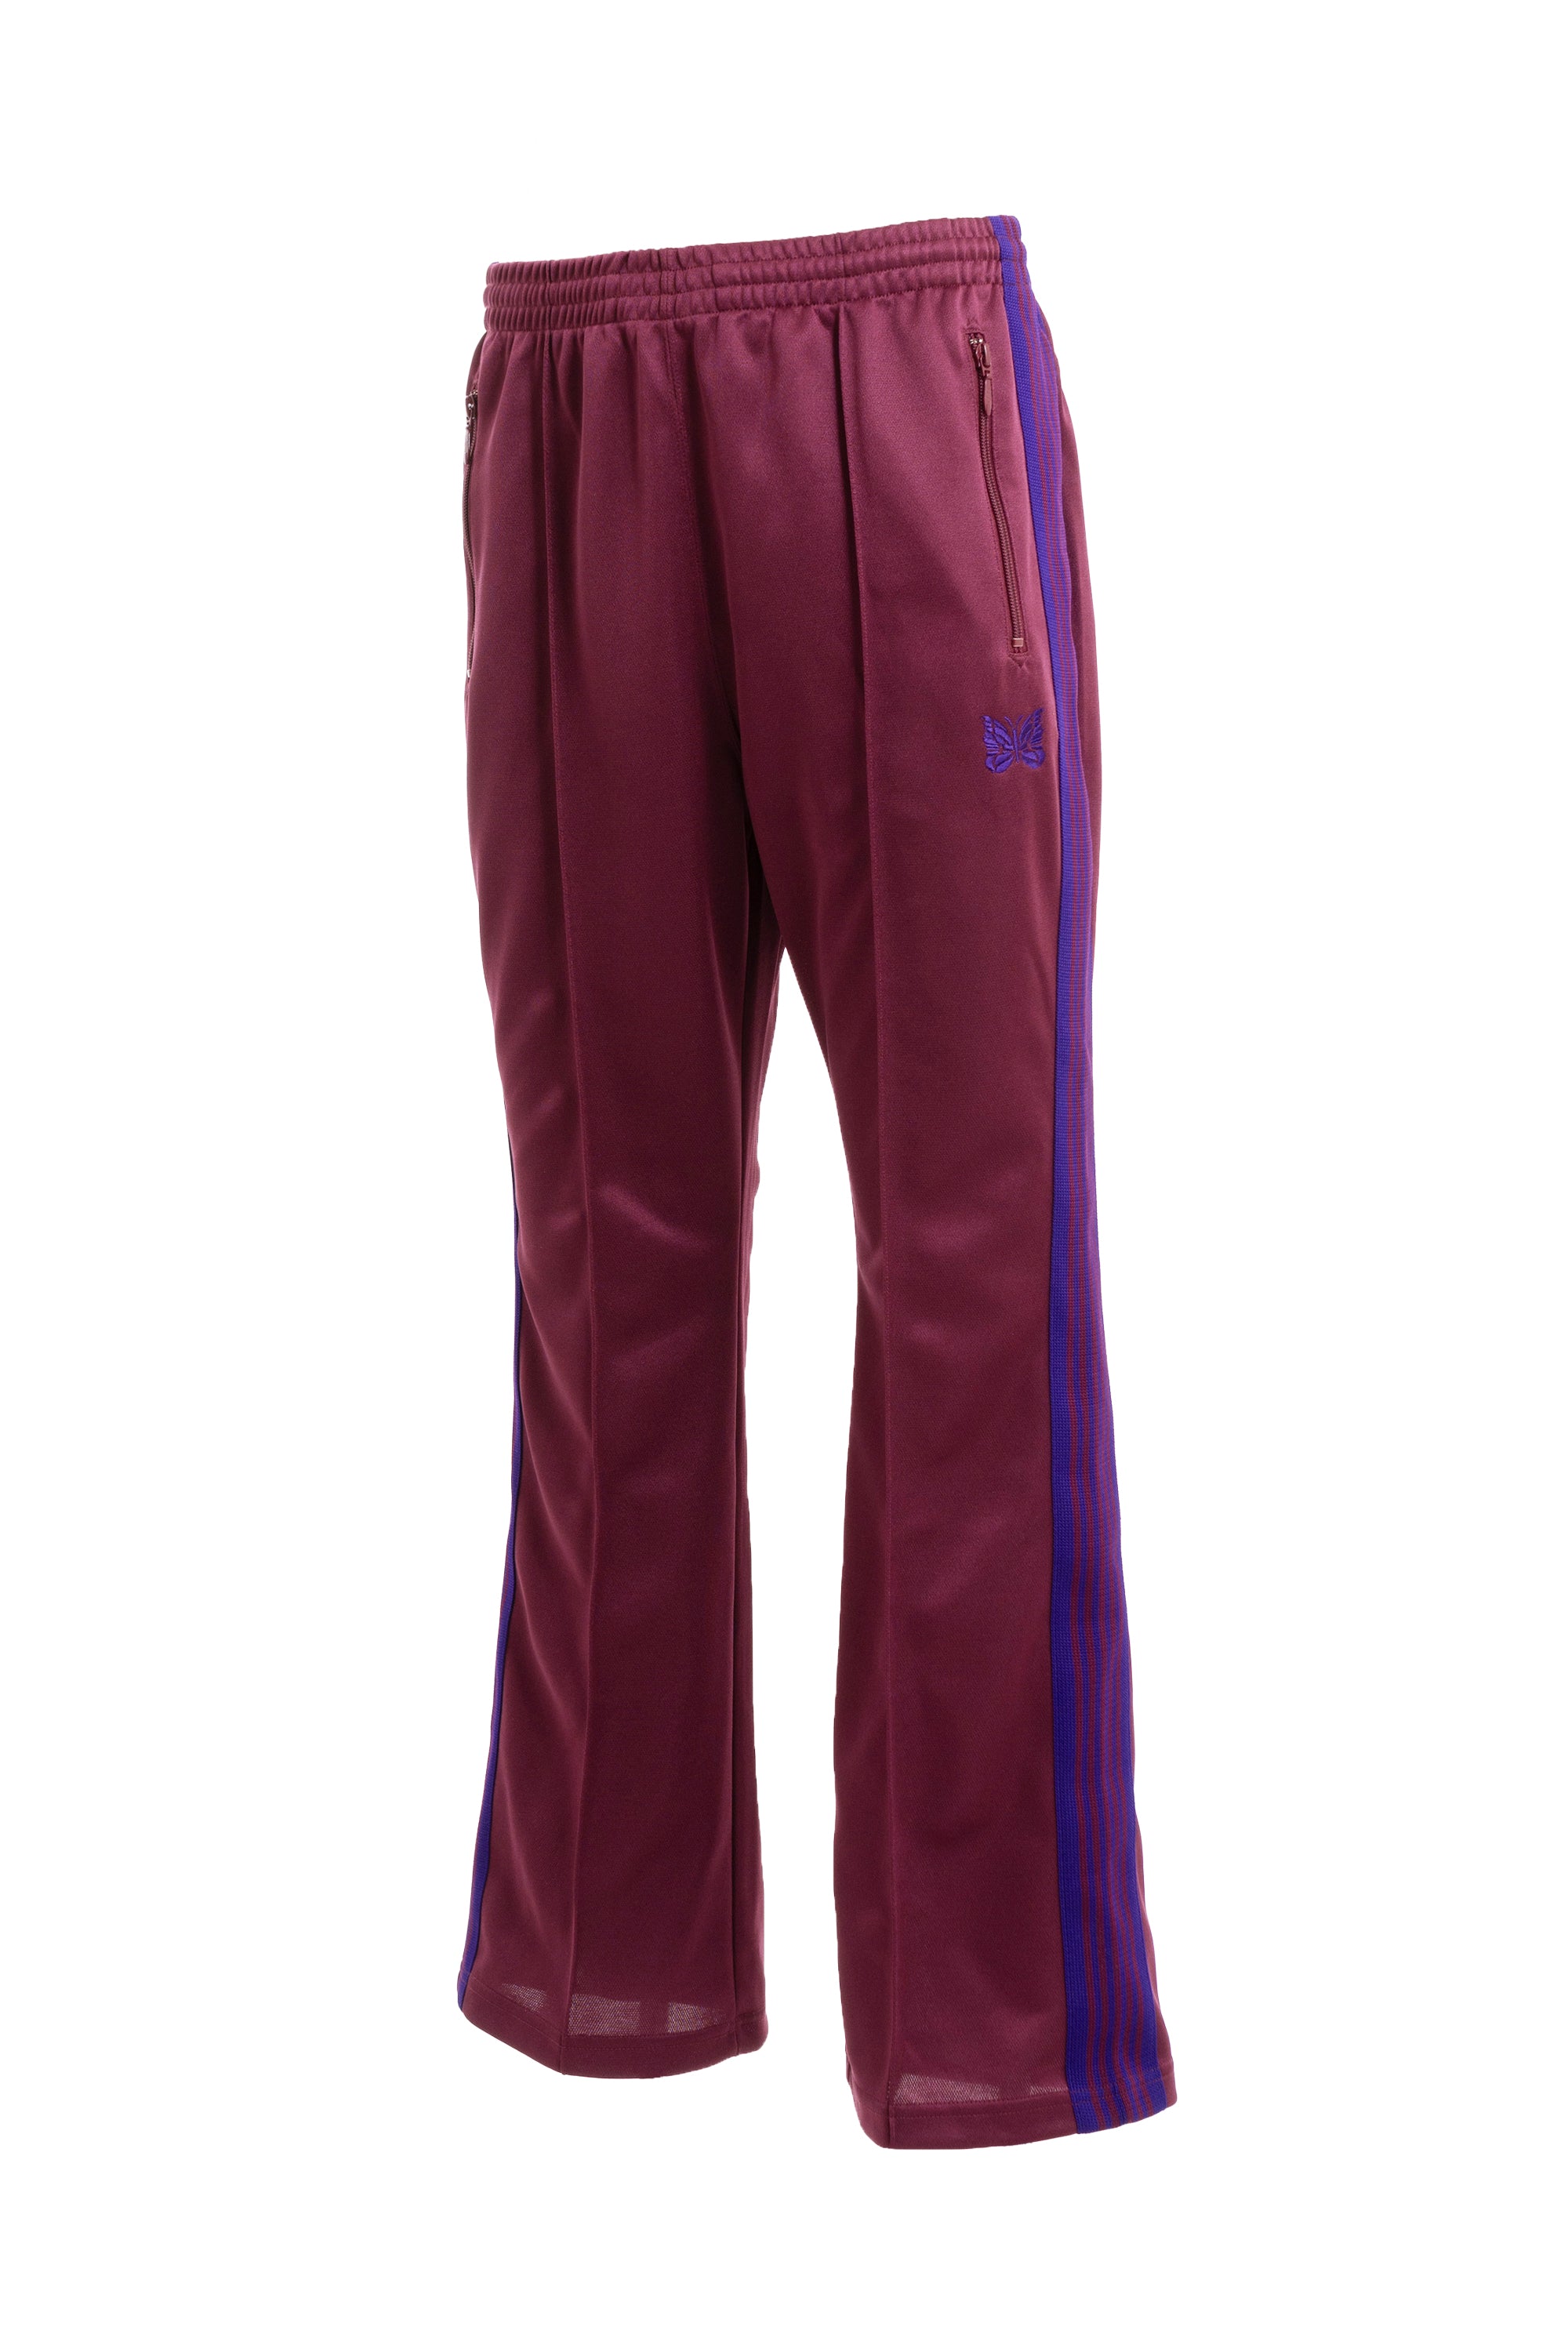 Needles FW23 BOOT-CUT TRACK PANT - POLY SMOOTH / WINE -NUBIAN